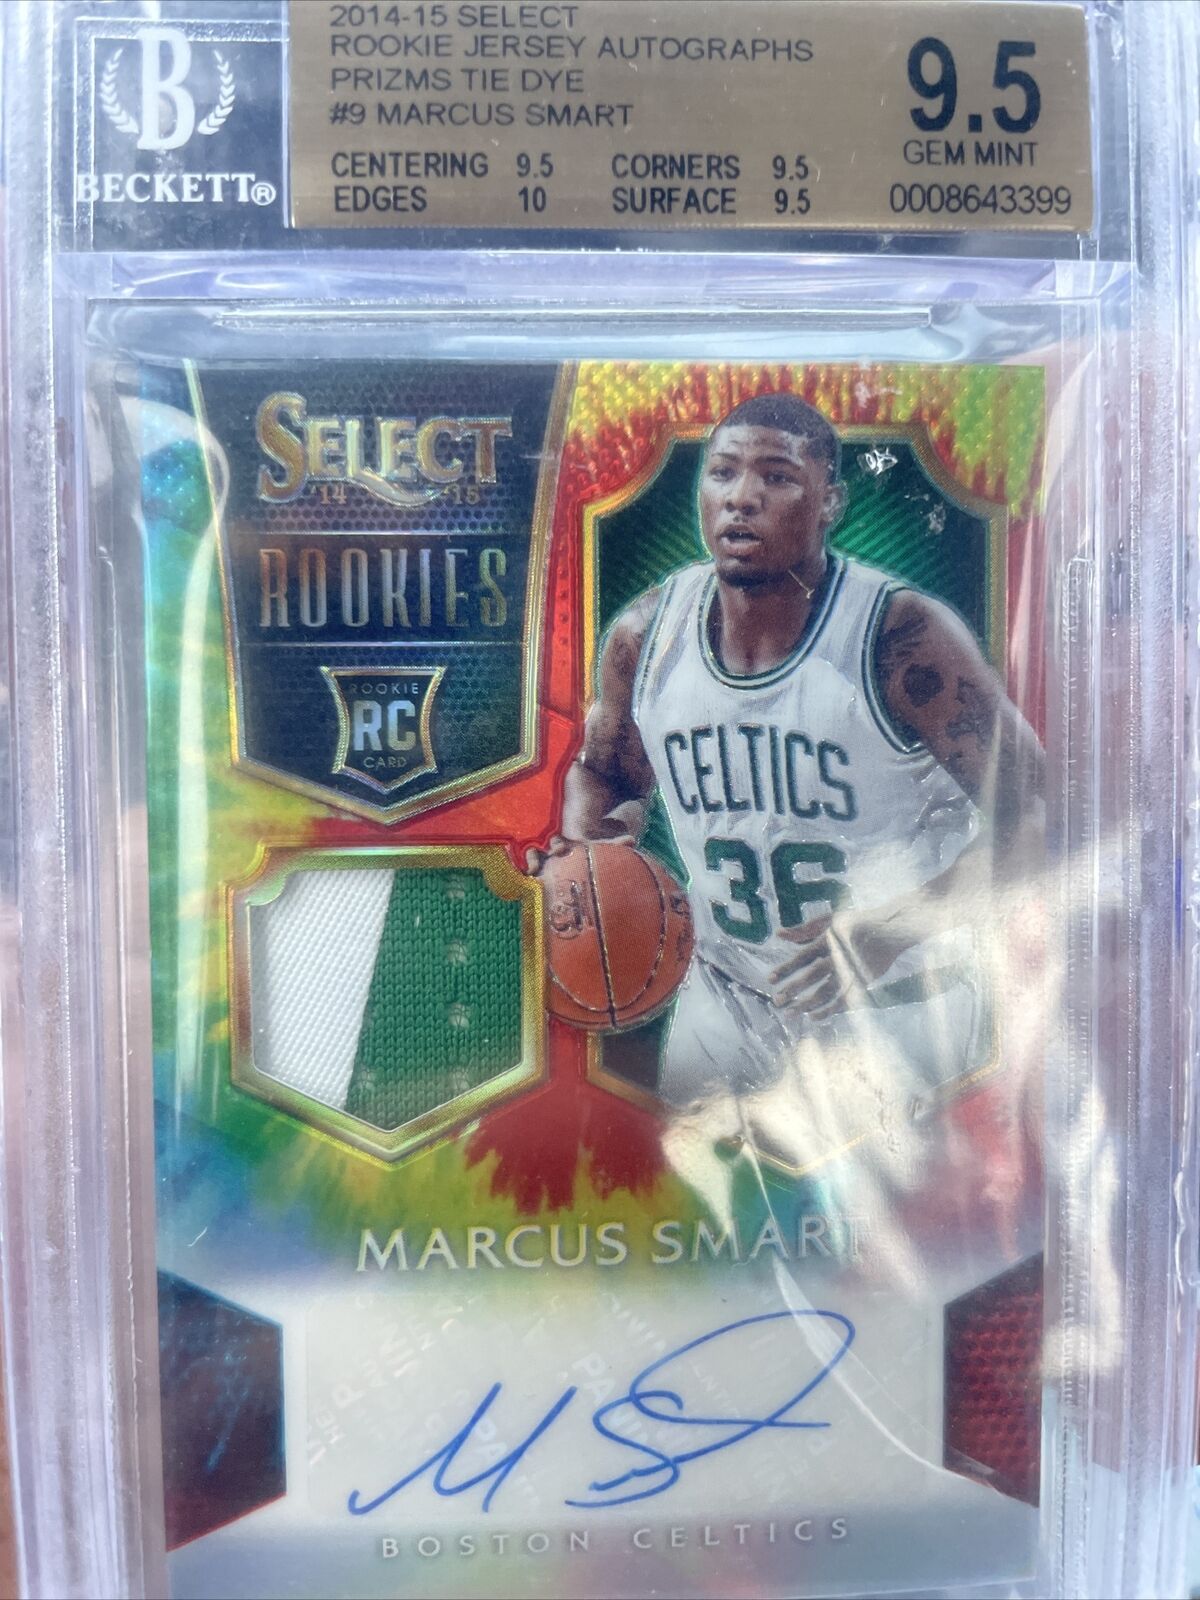 Trading Card 2014-2015 Select Rookie Jersey Autograph Prizm Tie Dye Marcus Smart